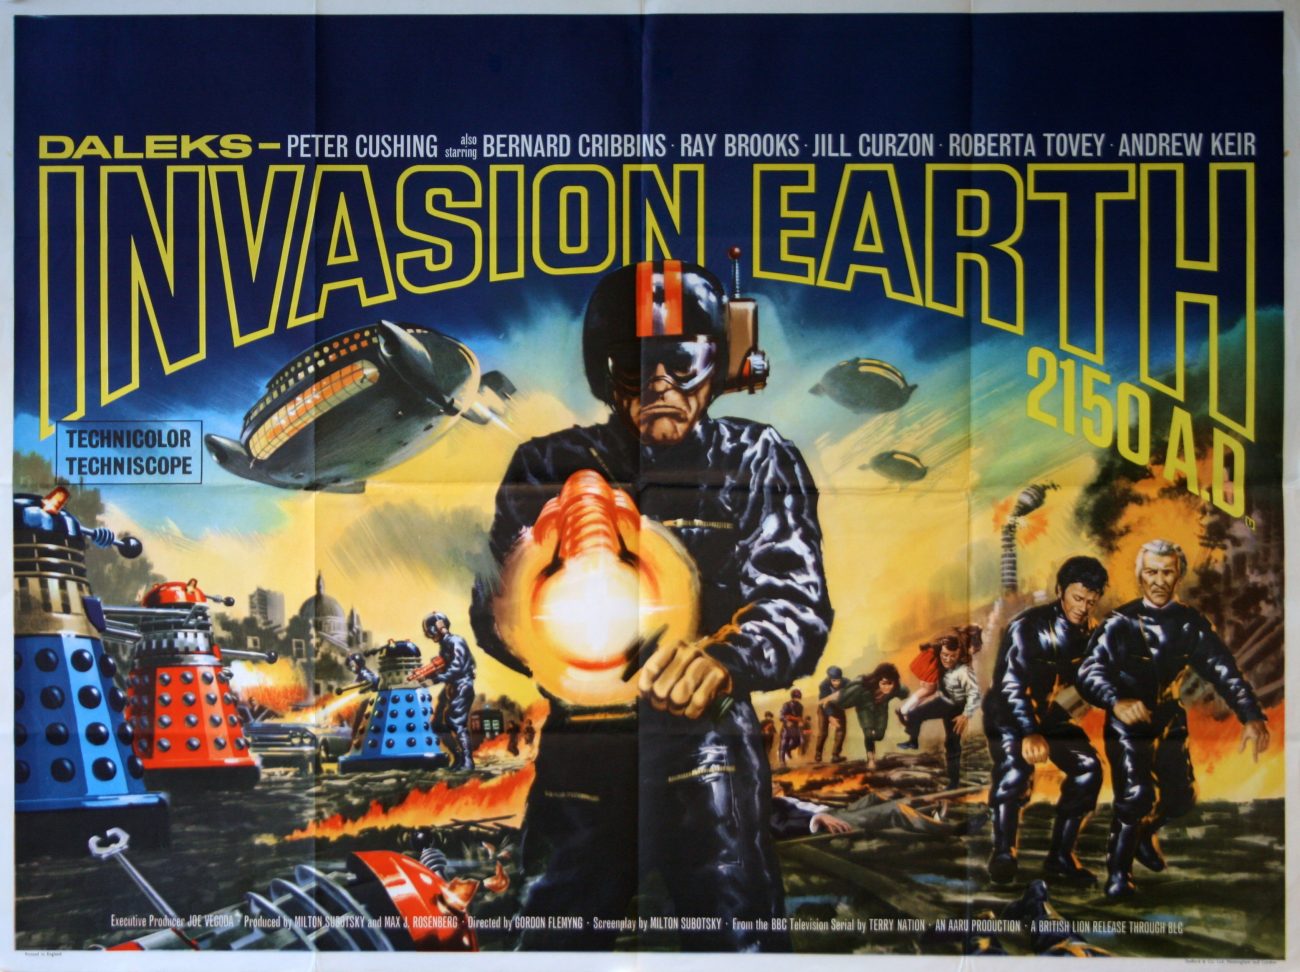 Daleks – Invasion Earth: 2150 A.D. poster